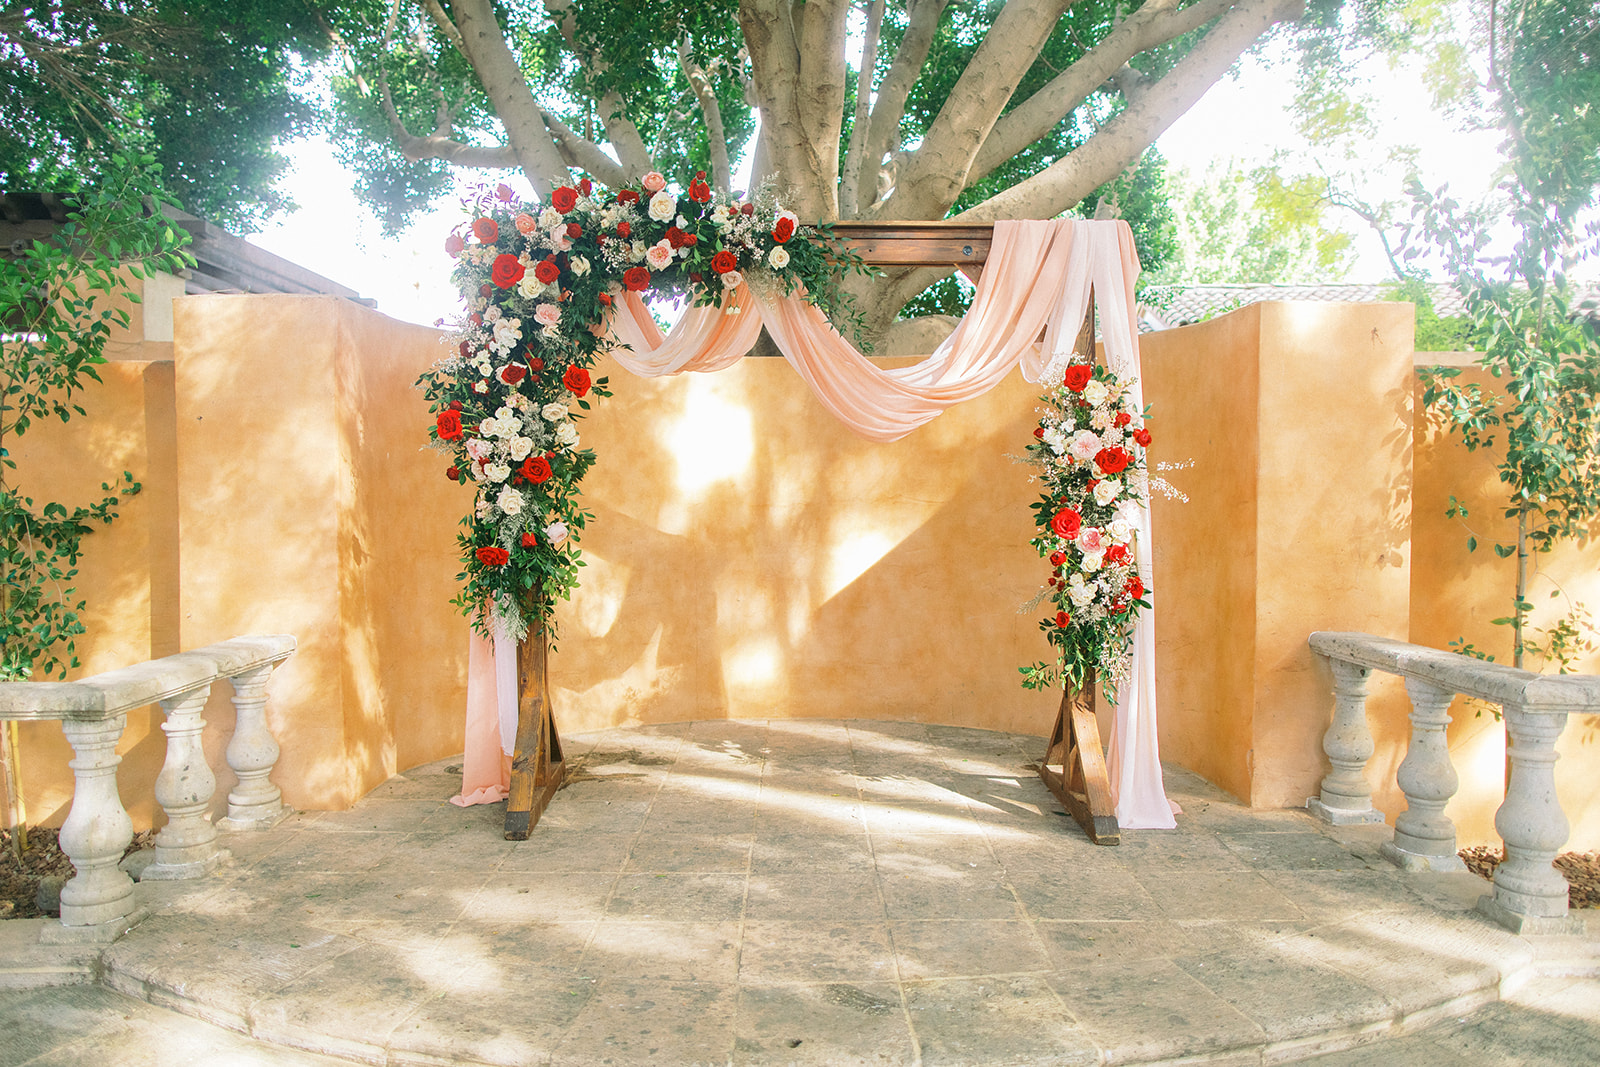 Wedding ceremony arch with floral installations and pink fabric.